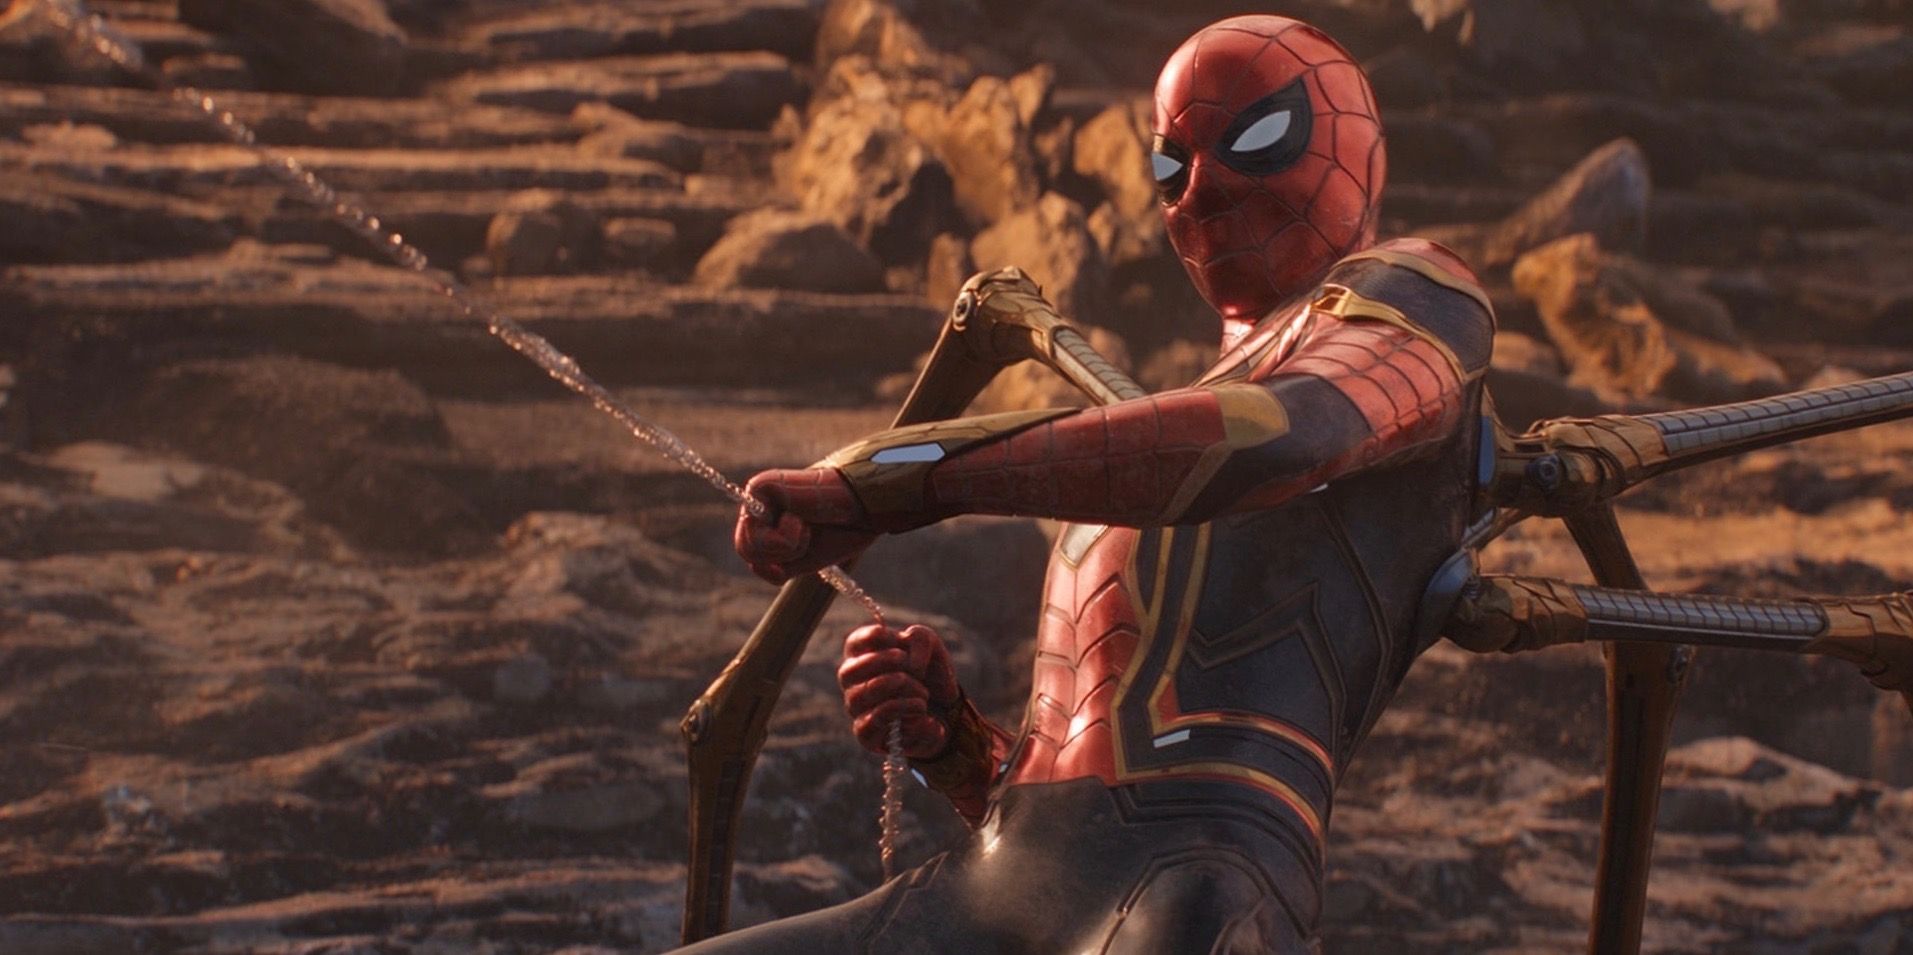 Spider-Man has the highest kills in Avengers Endgame after Iron